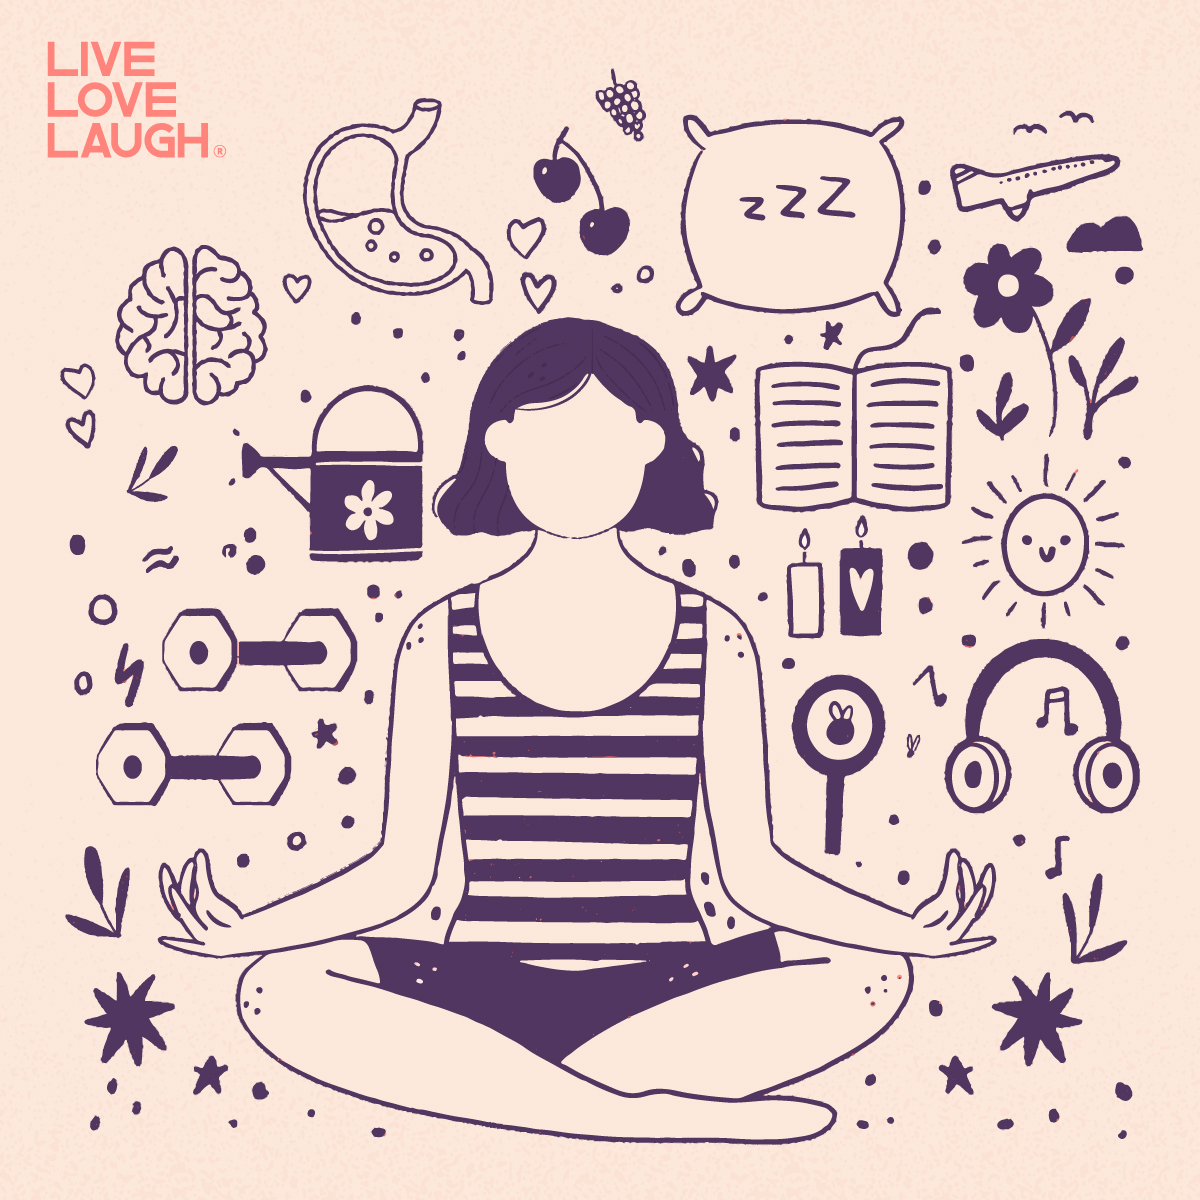 Uncover the intricate relationship between stress and your body, and discover practical strategies for managing its effects. Take control of your health and happiness today by exploring the full article below: thelivelovelaughfoundation.org/blog/stress/st… #April #MentalHealthMatters #MindBodyMatters